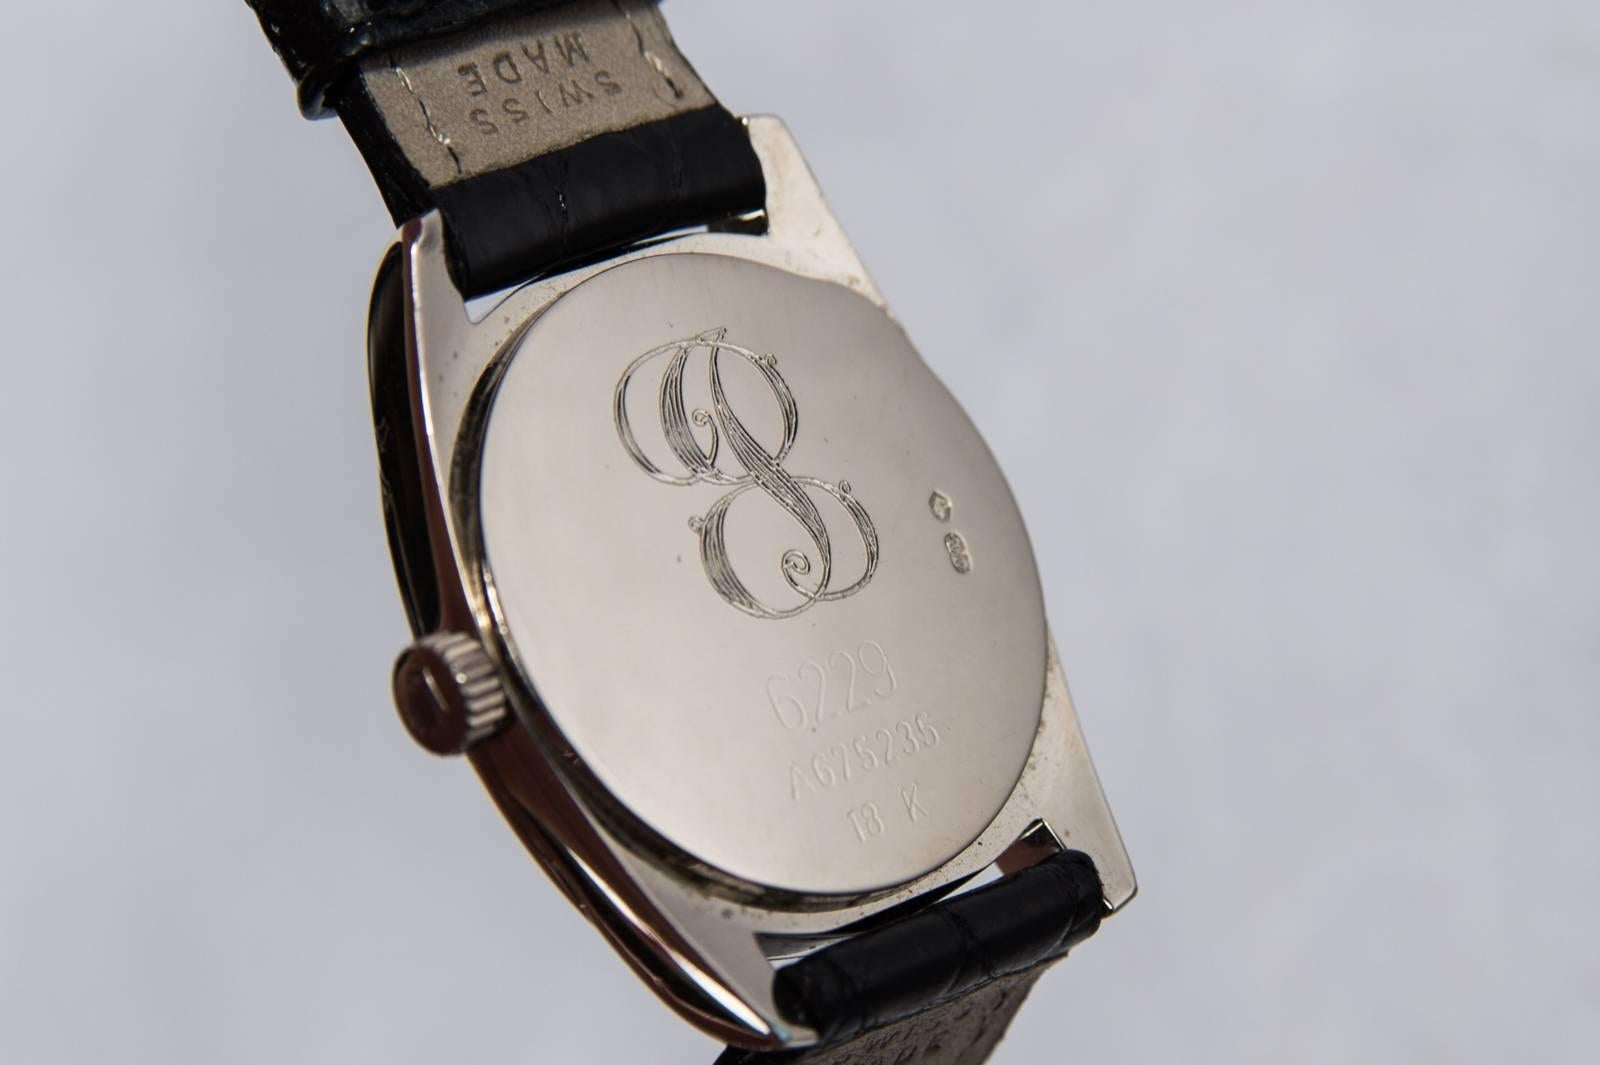 Rolex Cellini Danaos womens 18-karat white gold luxury watch 

Comes with Rolex service division box and papers 

Manual winding 

Brand name Rolex
Style number 6229/8
Series Cellini Danaos
Gender ladies
Case material 18-karat white